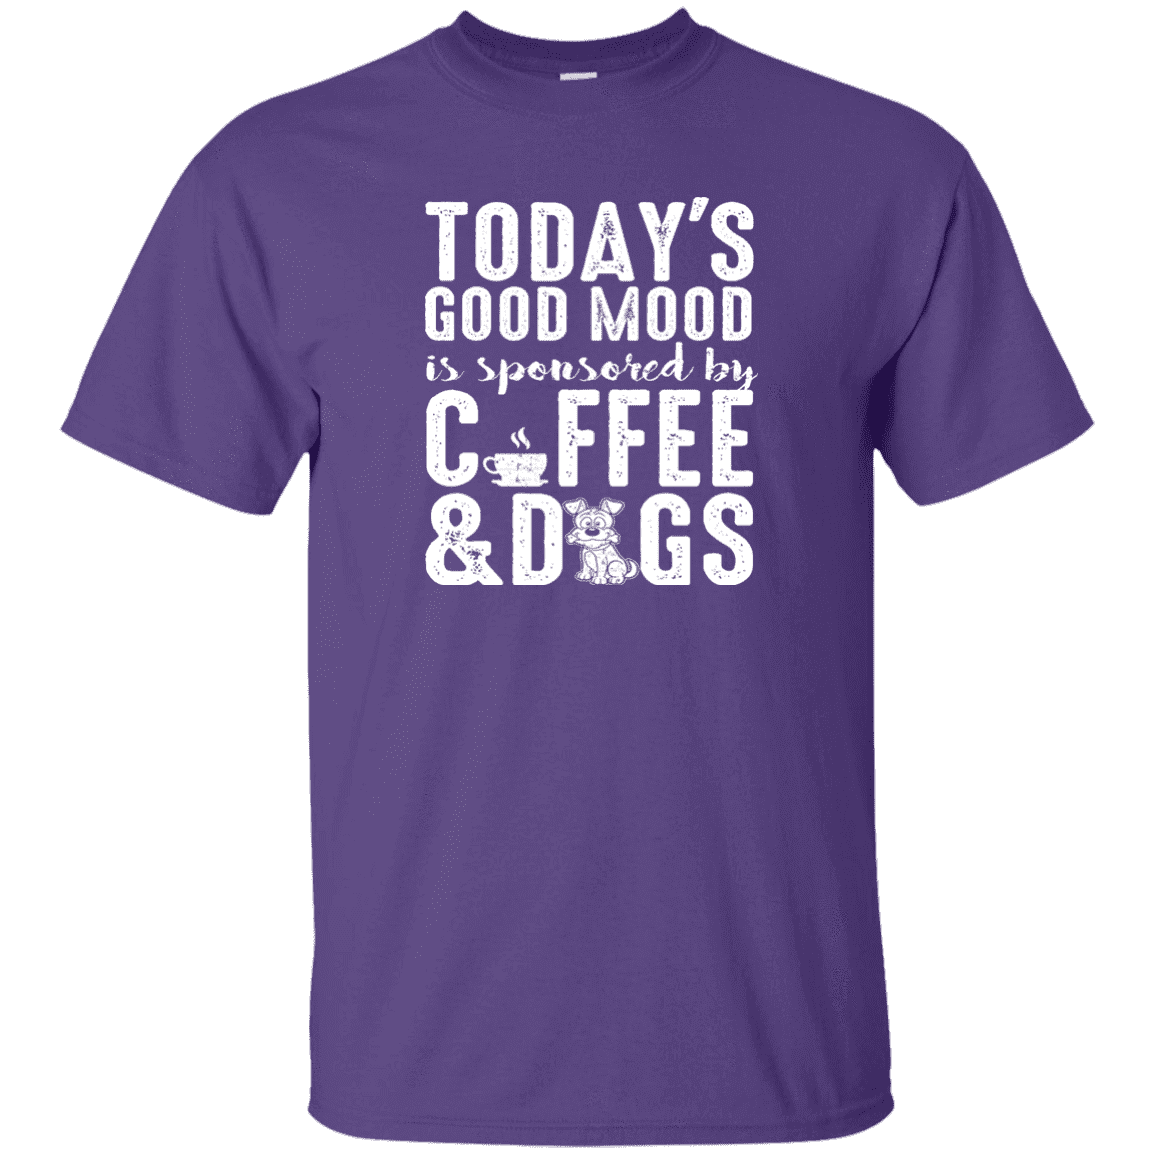 Today's Good Mood Coffee & Dogs - T Shirt.